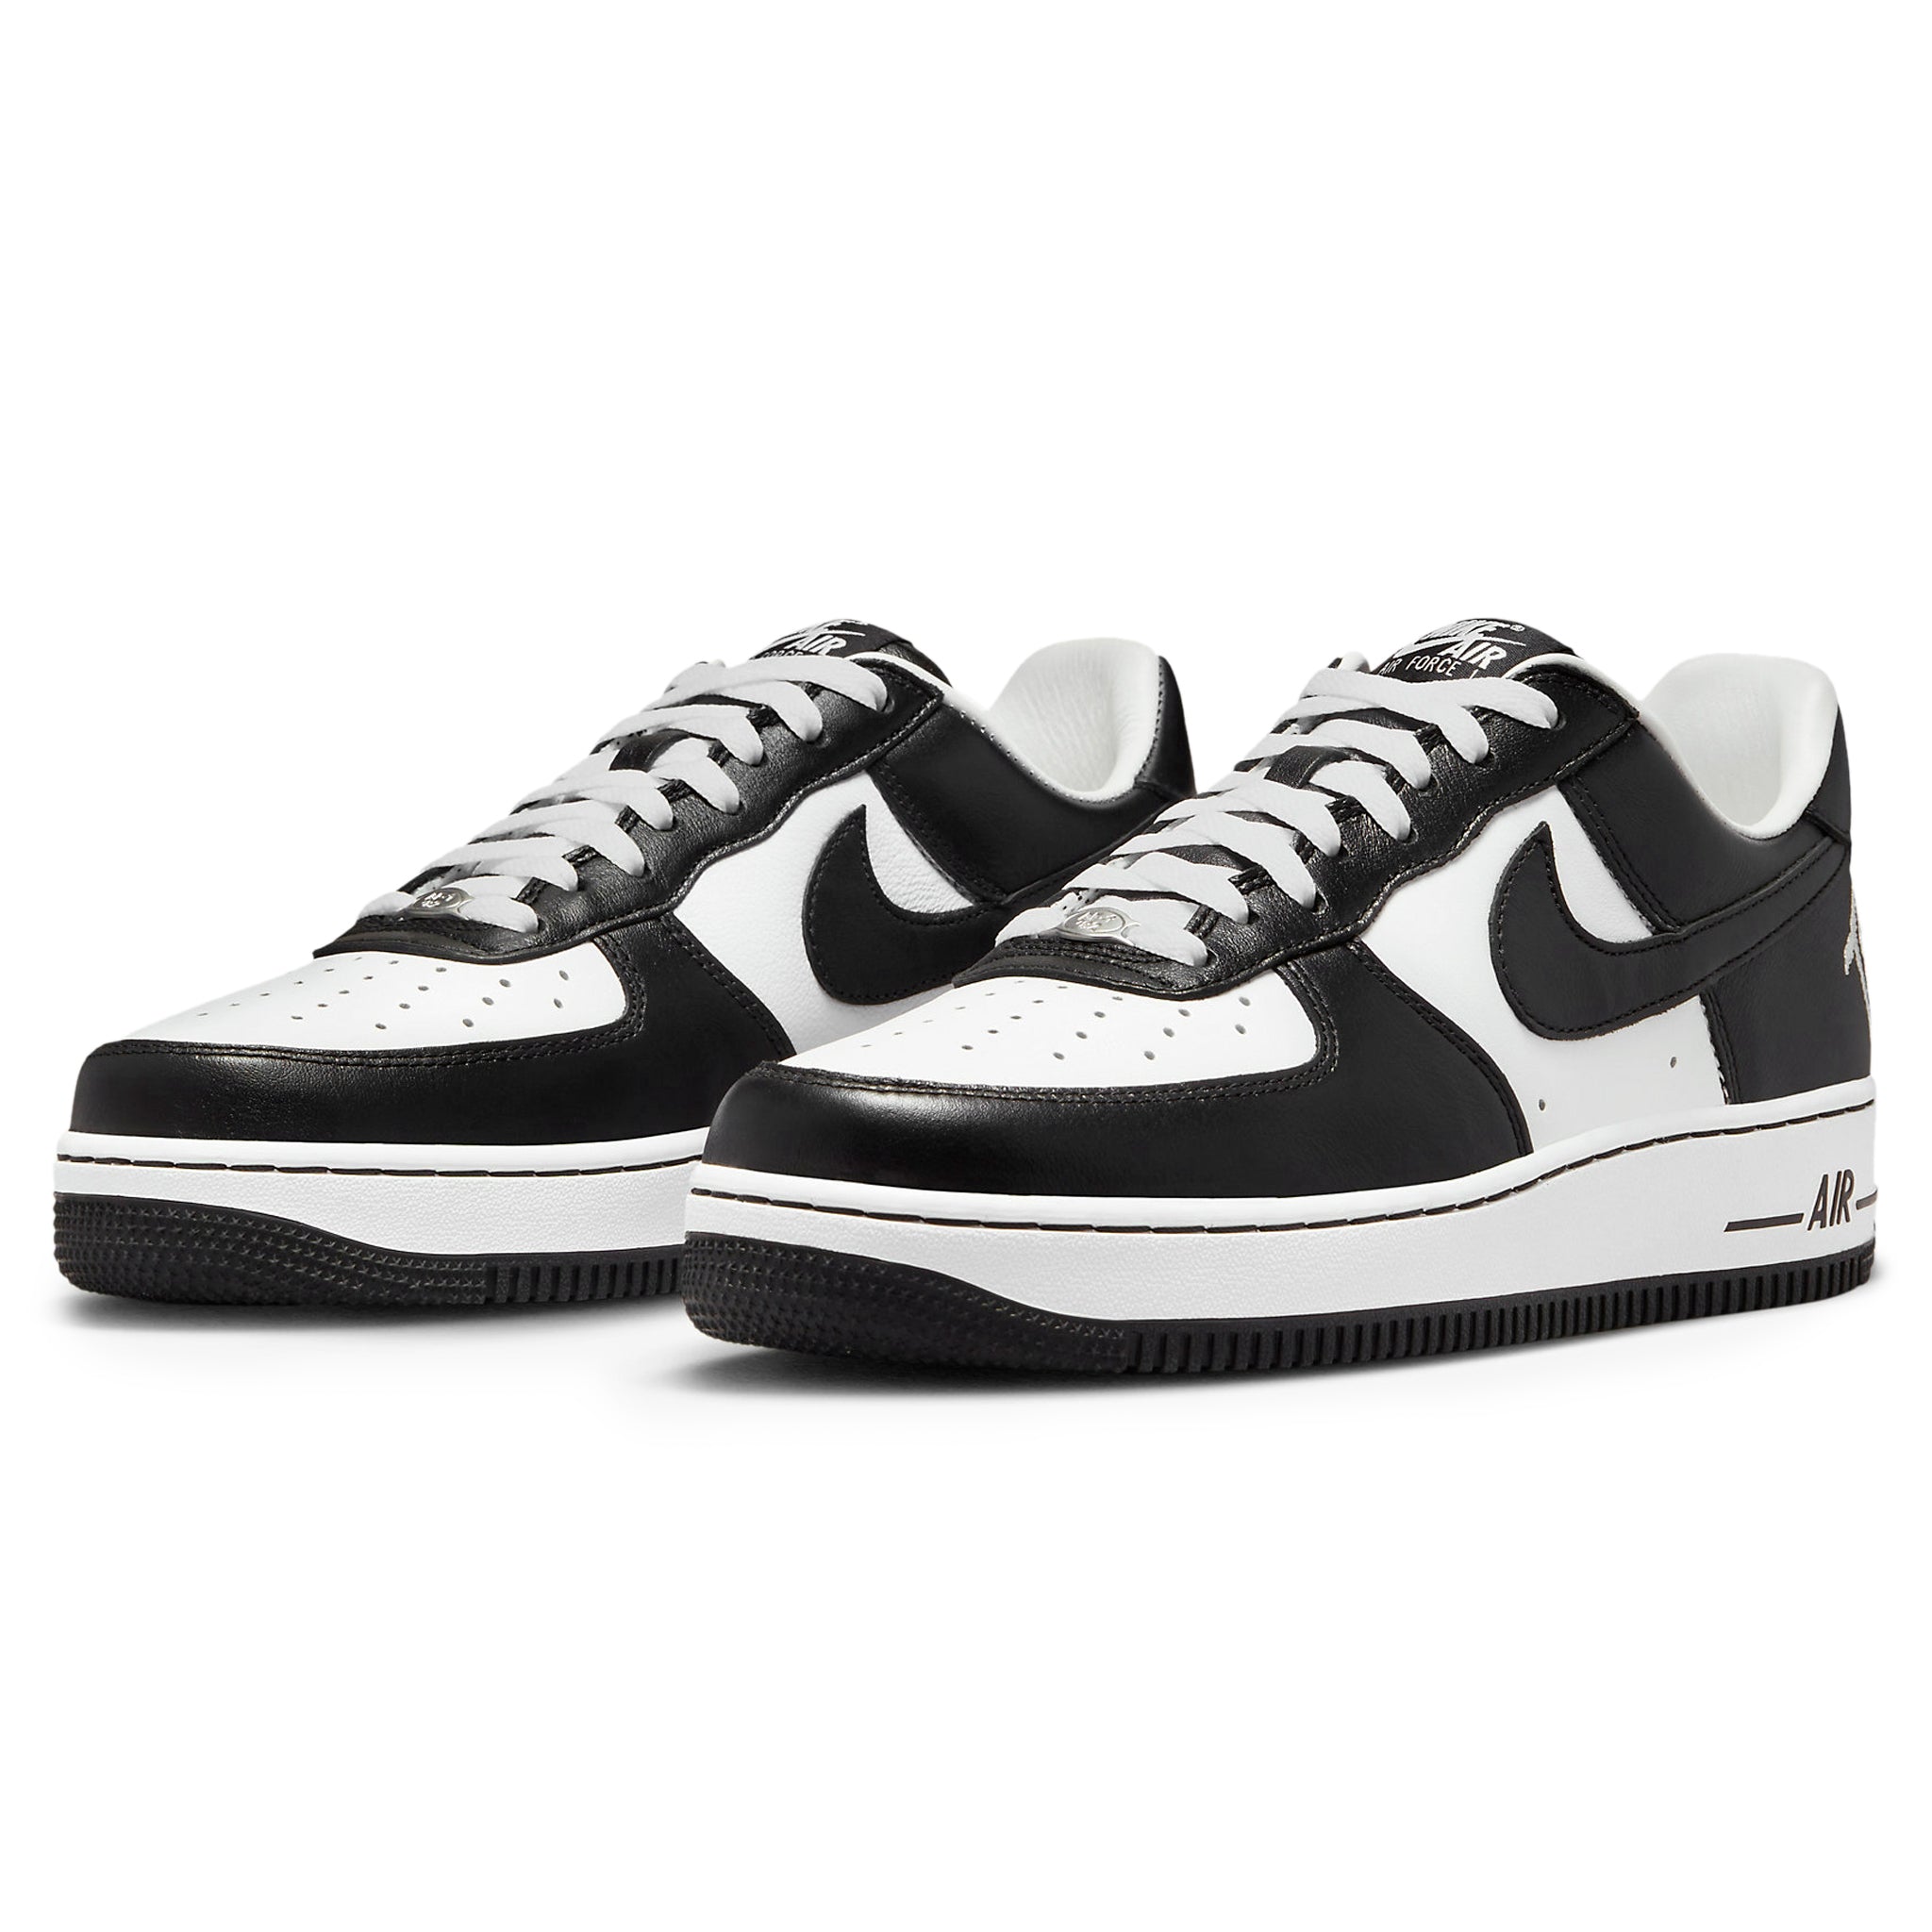 Front Side View of terror squad x nike air force 1 low white black fd7855-001